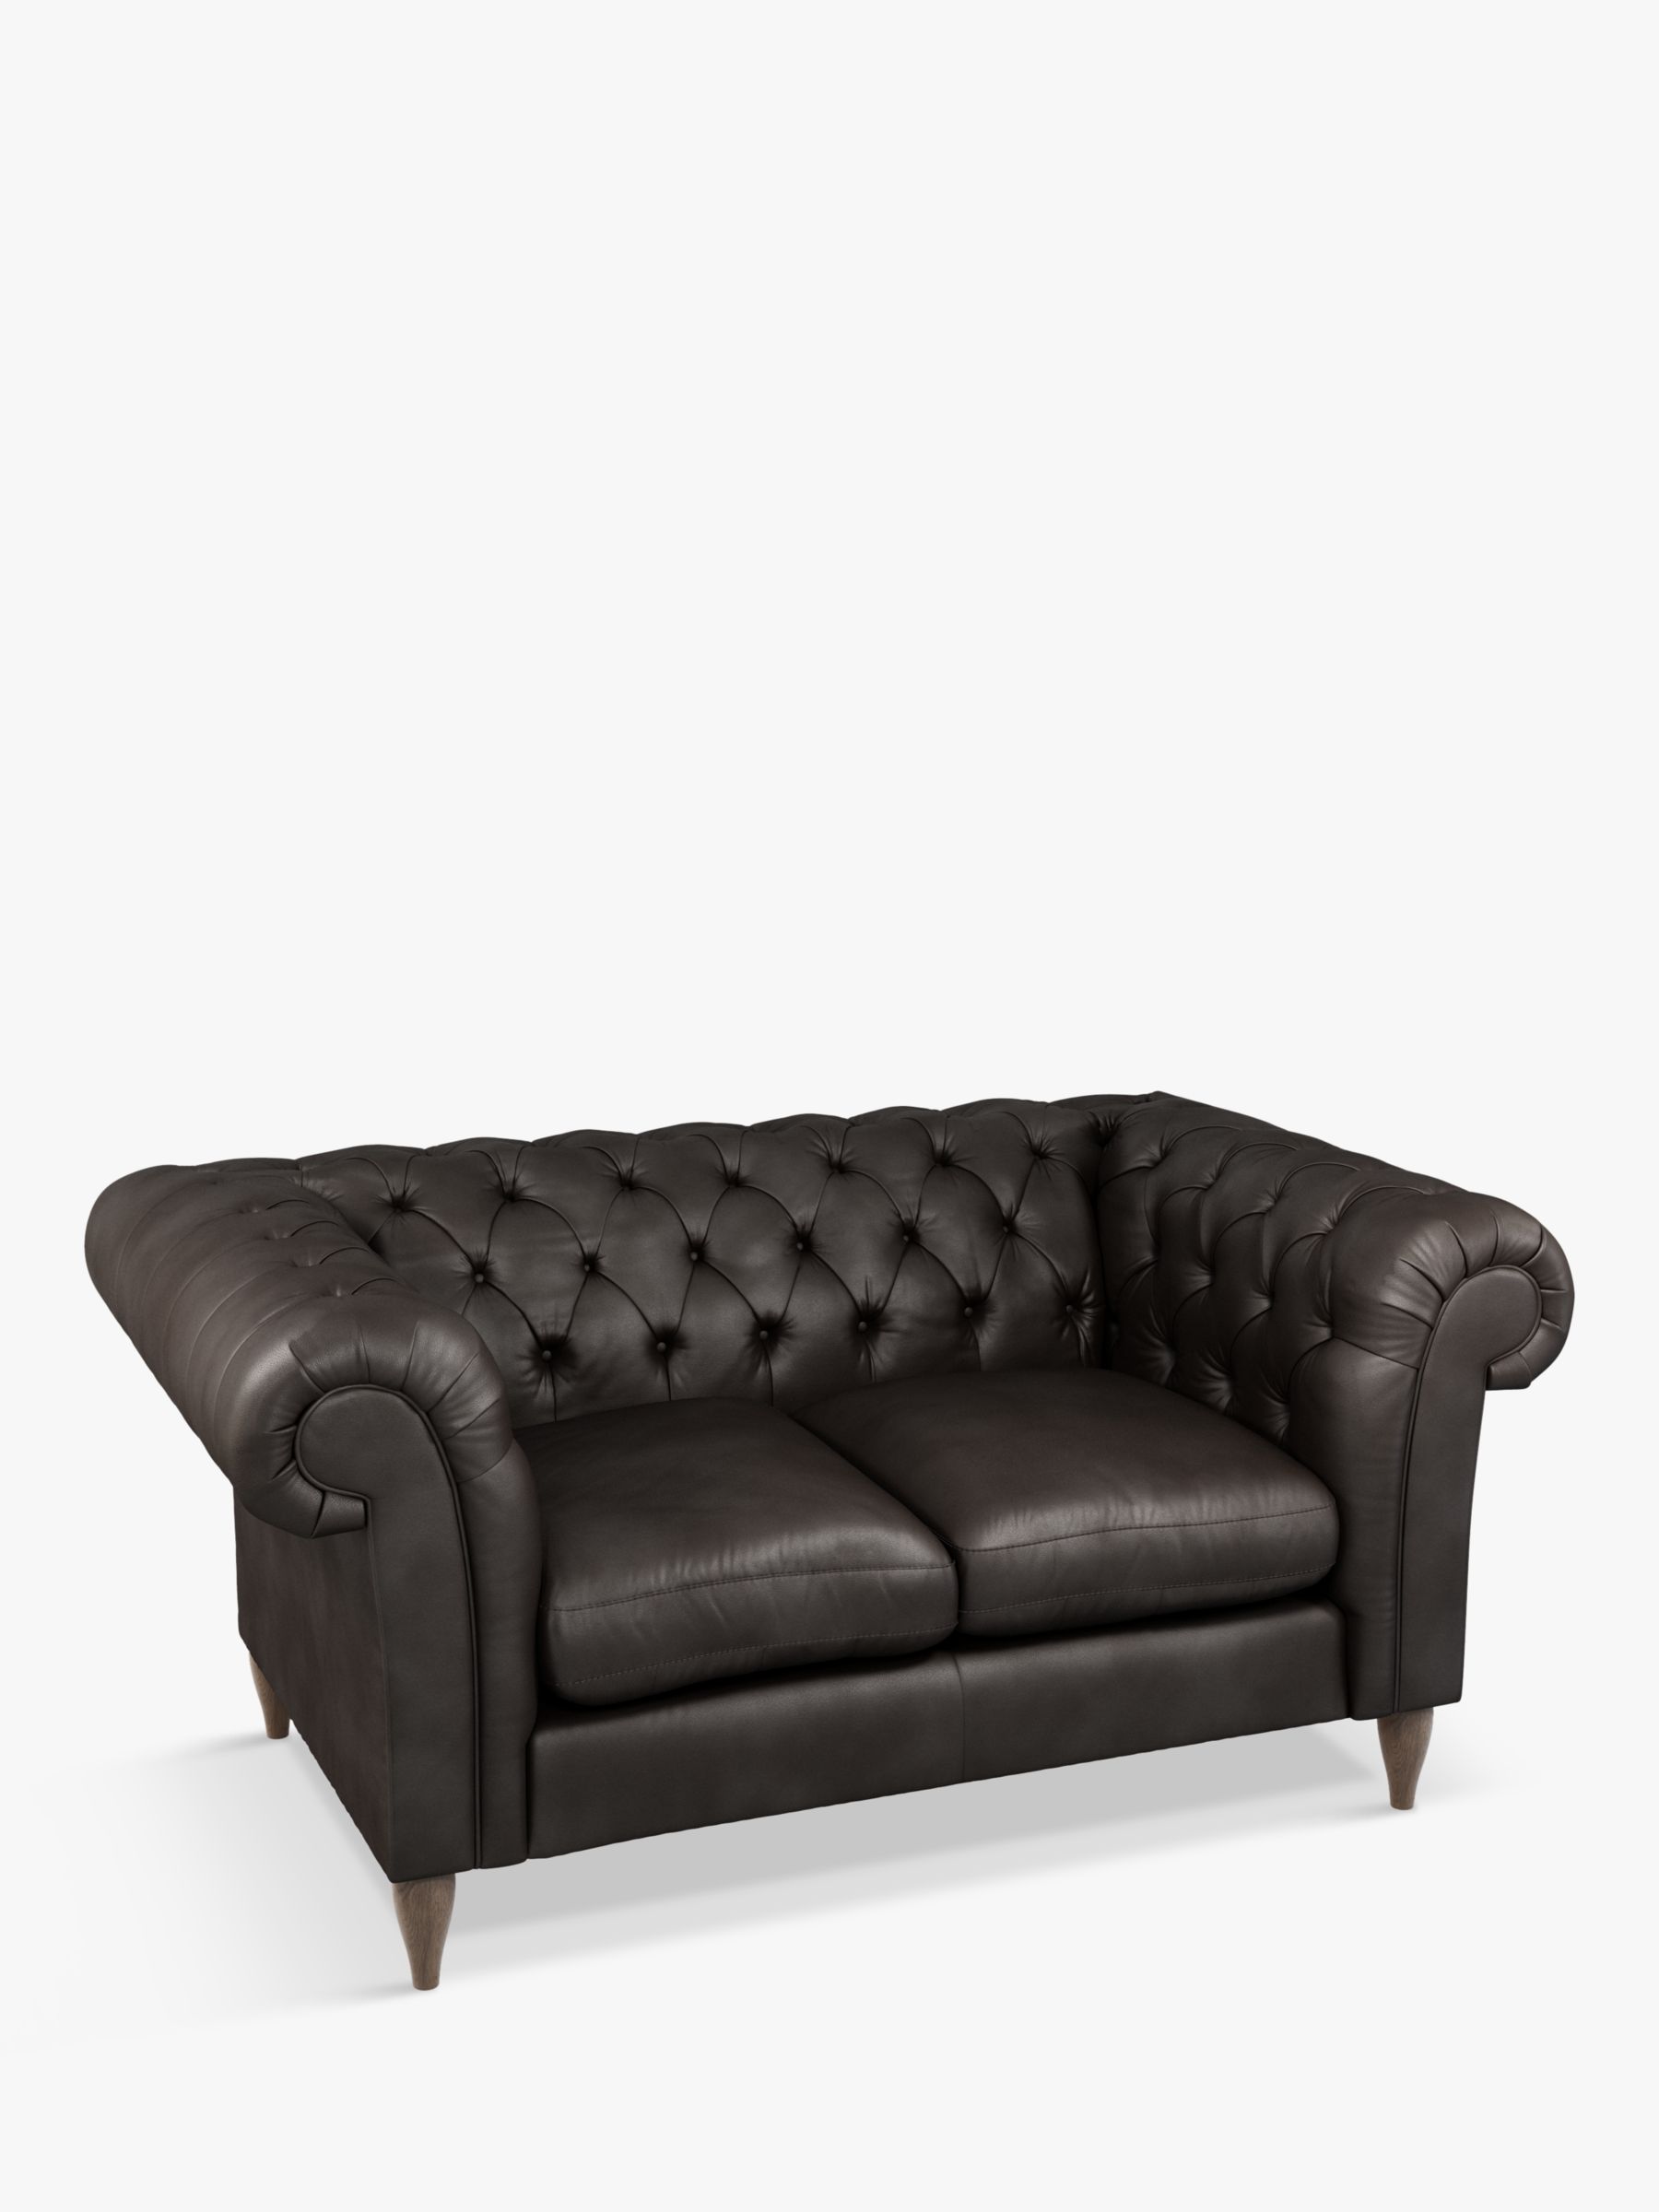 Photo of John lewis cromwell chesterfield small 2 seater leather sofa dark leg